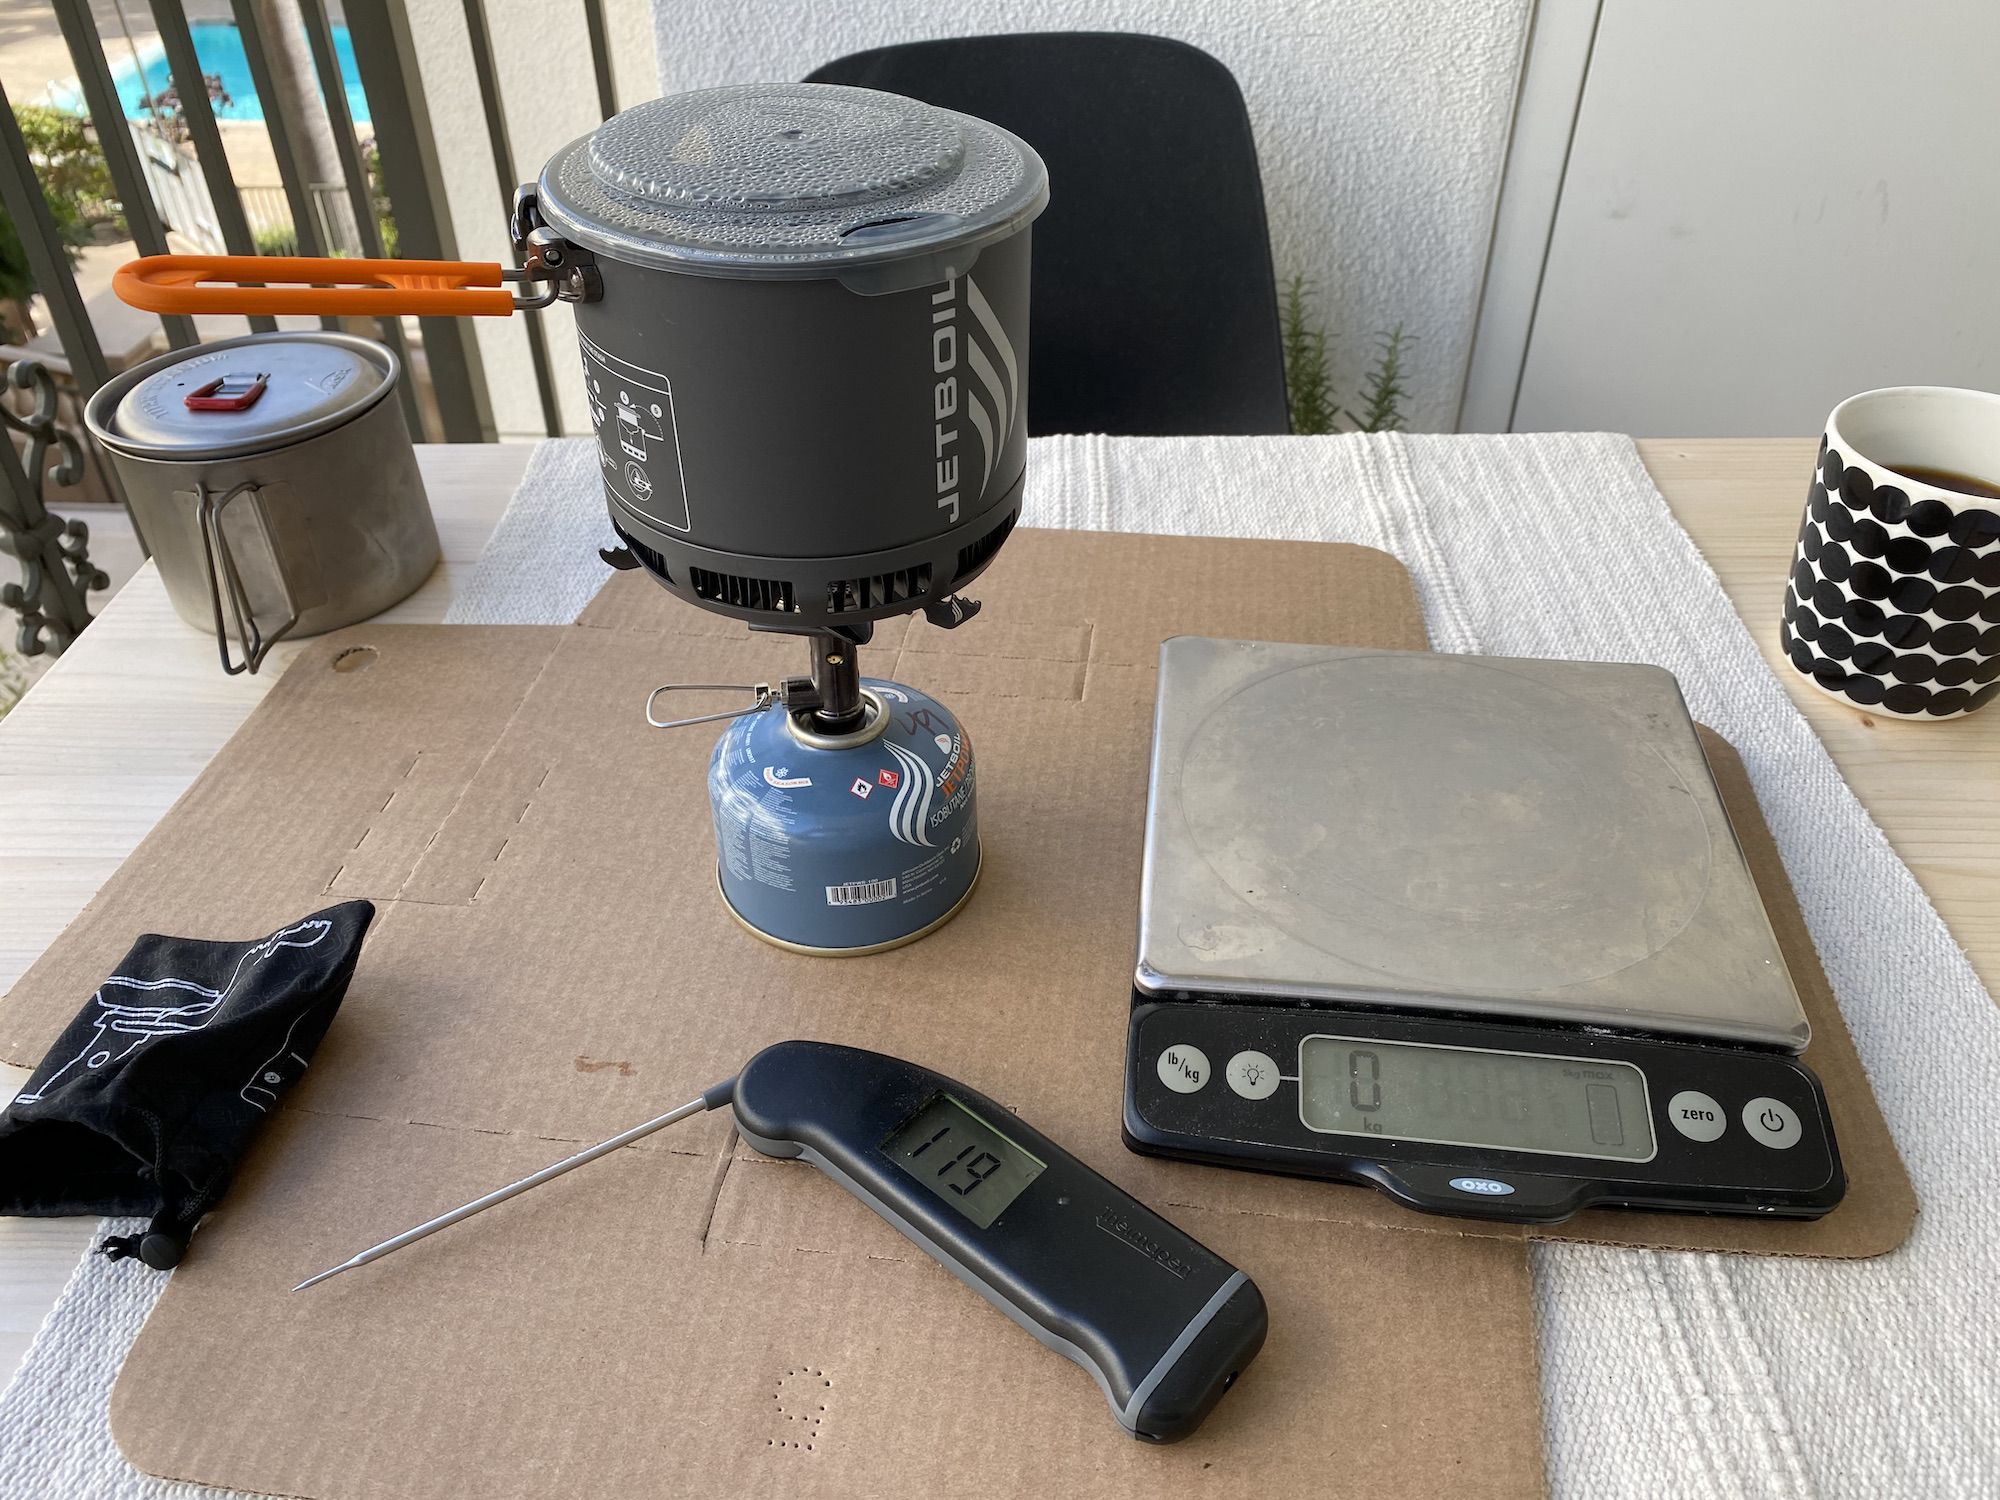 The test setup: Jetboil Stash stove, a digital scale, and a thermometer.